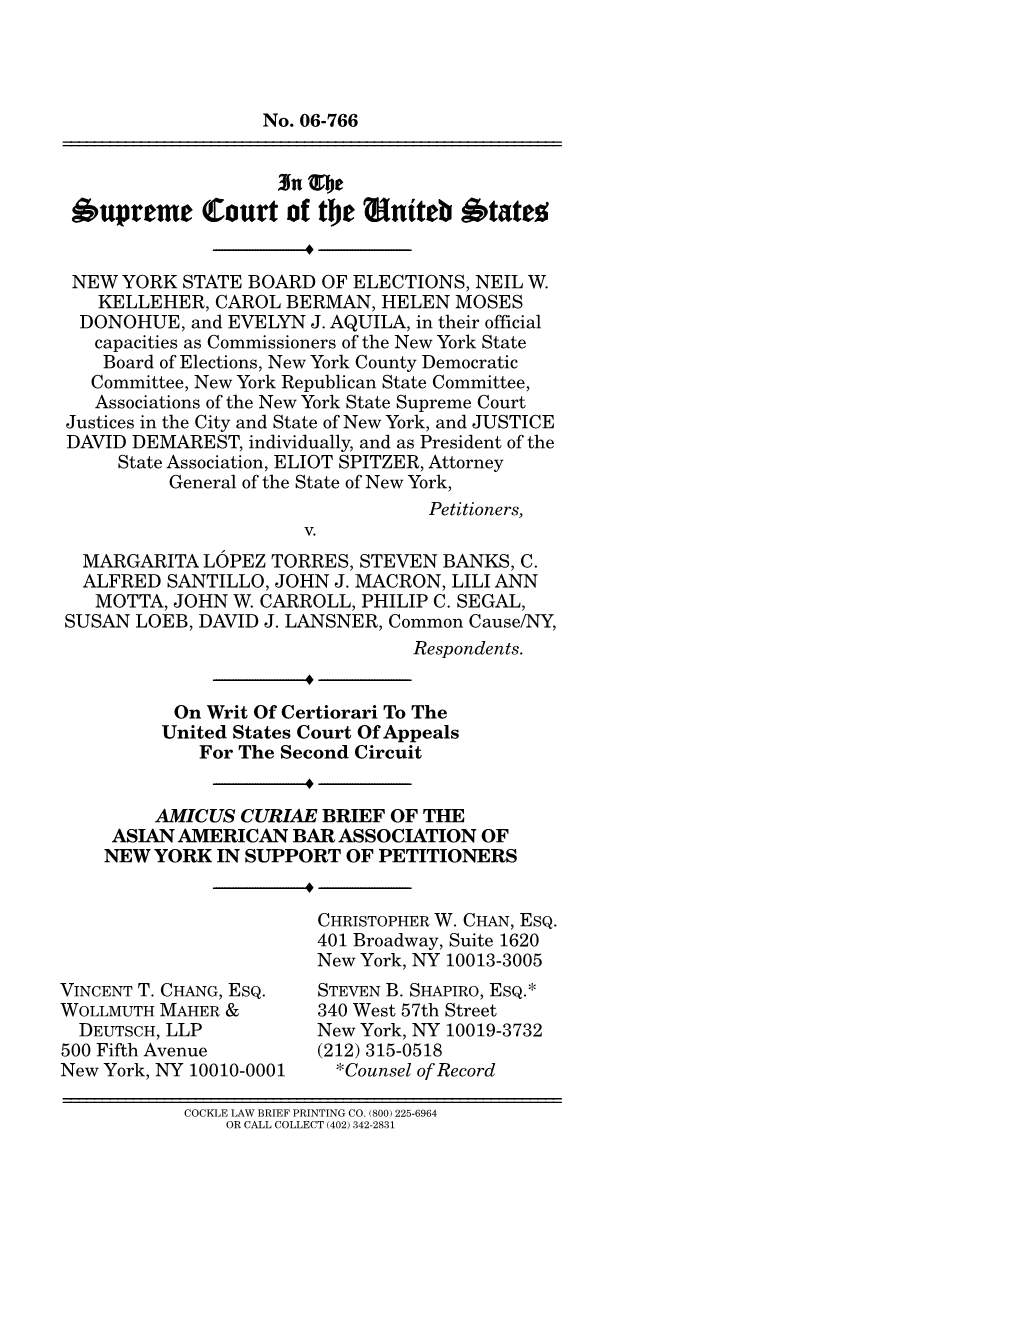 Supreme Court of the United States ------♦ ------NEW YORK STATE BOARD of ELECTIONS, NEIL W